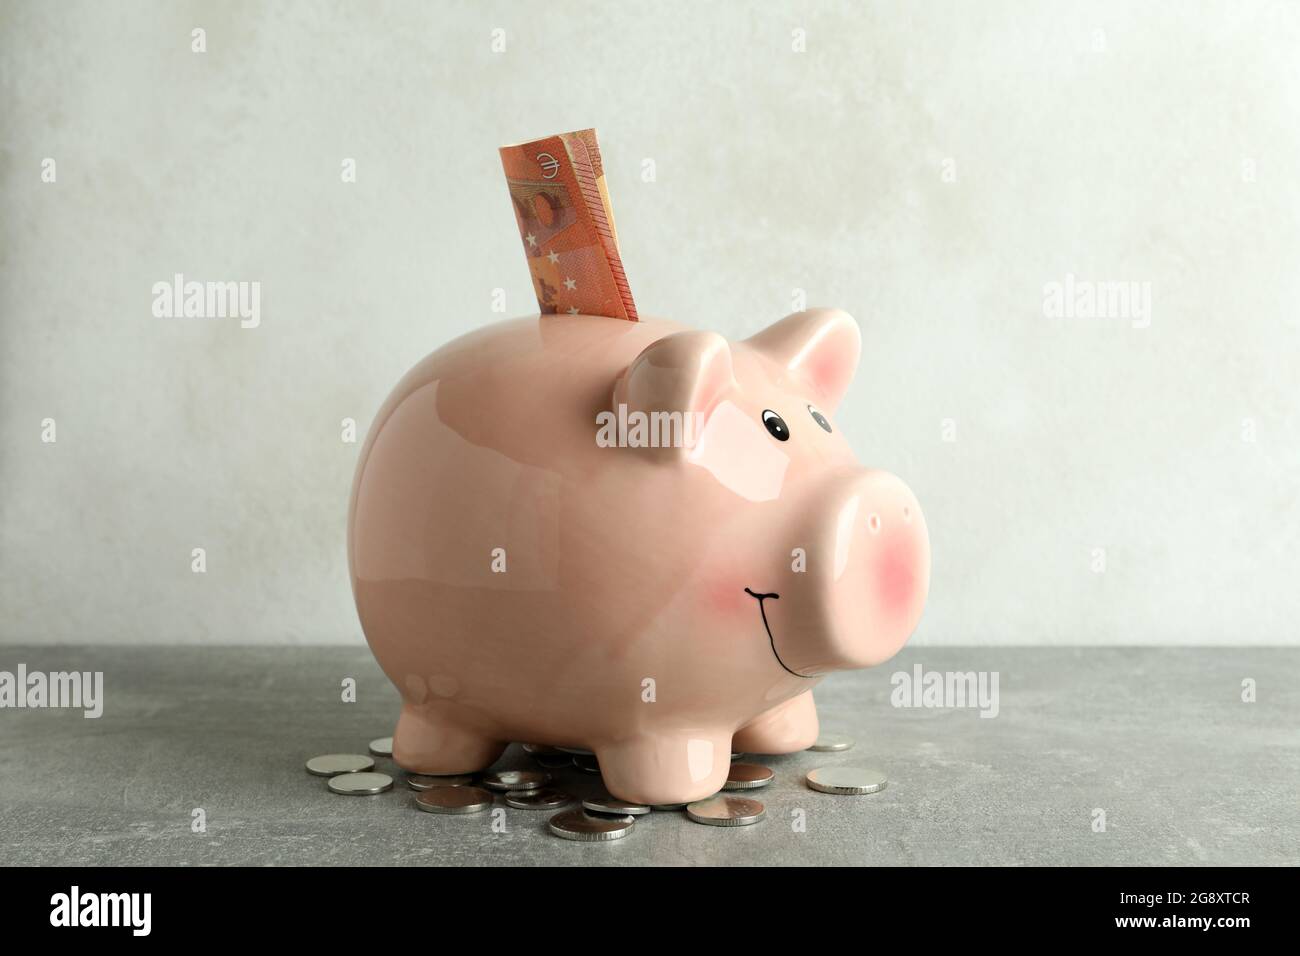 Concept of pension or retirement plan on gray table Stock Photo